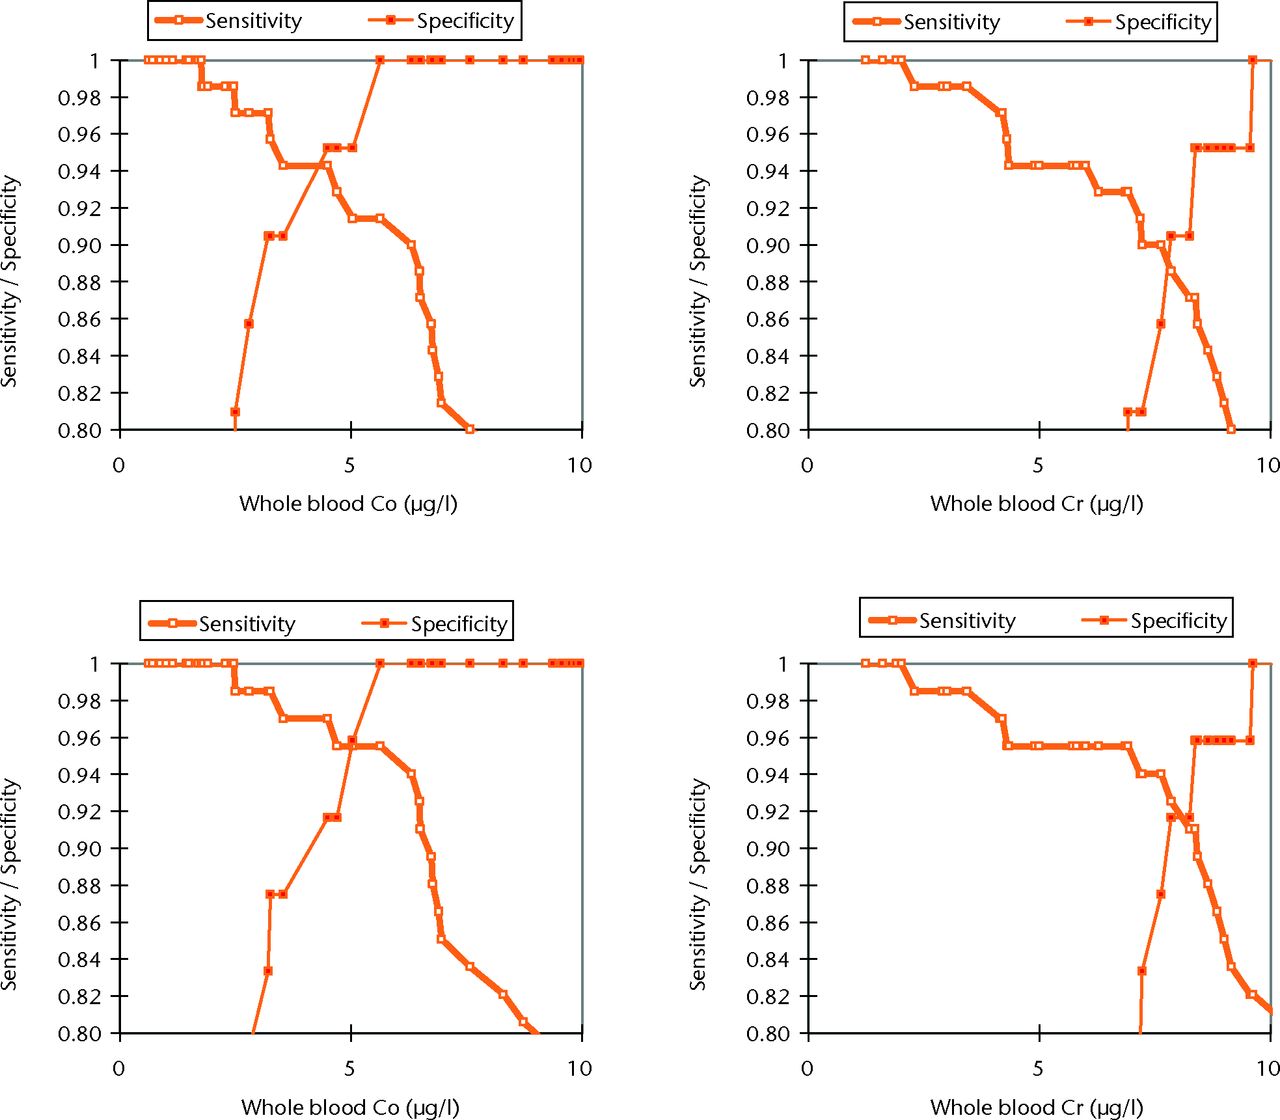 Fig. 5 
            Graphs showing the sensitivity and specificity
of whole blood cobalt (Co) and chromium (Cr) to identify abnormal
wear defined as ≥ 2 mm3/year (top row) and ≥ 3 mm3/year
(bottom row).
          